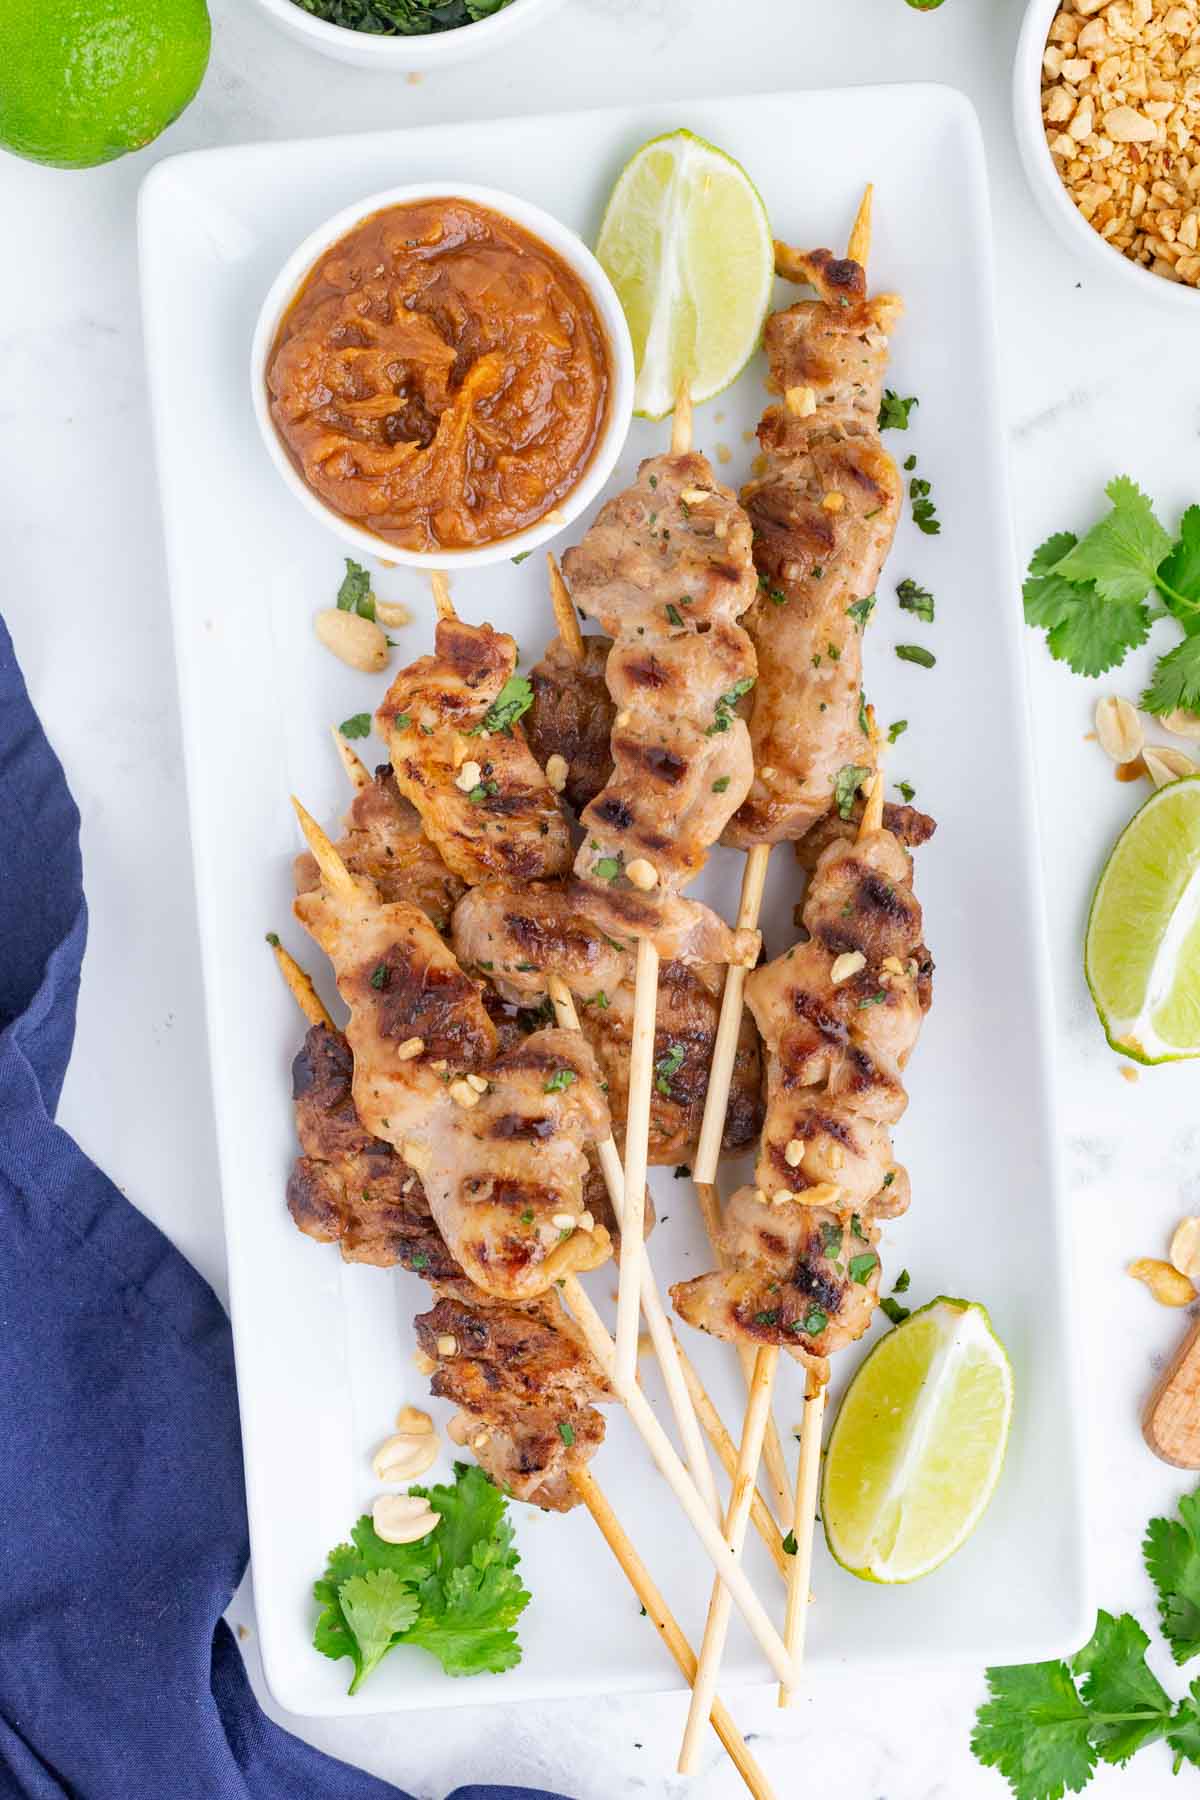 A rectangular plate with chicken stay skewers is served at a party.